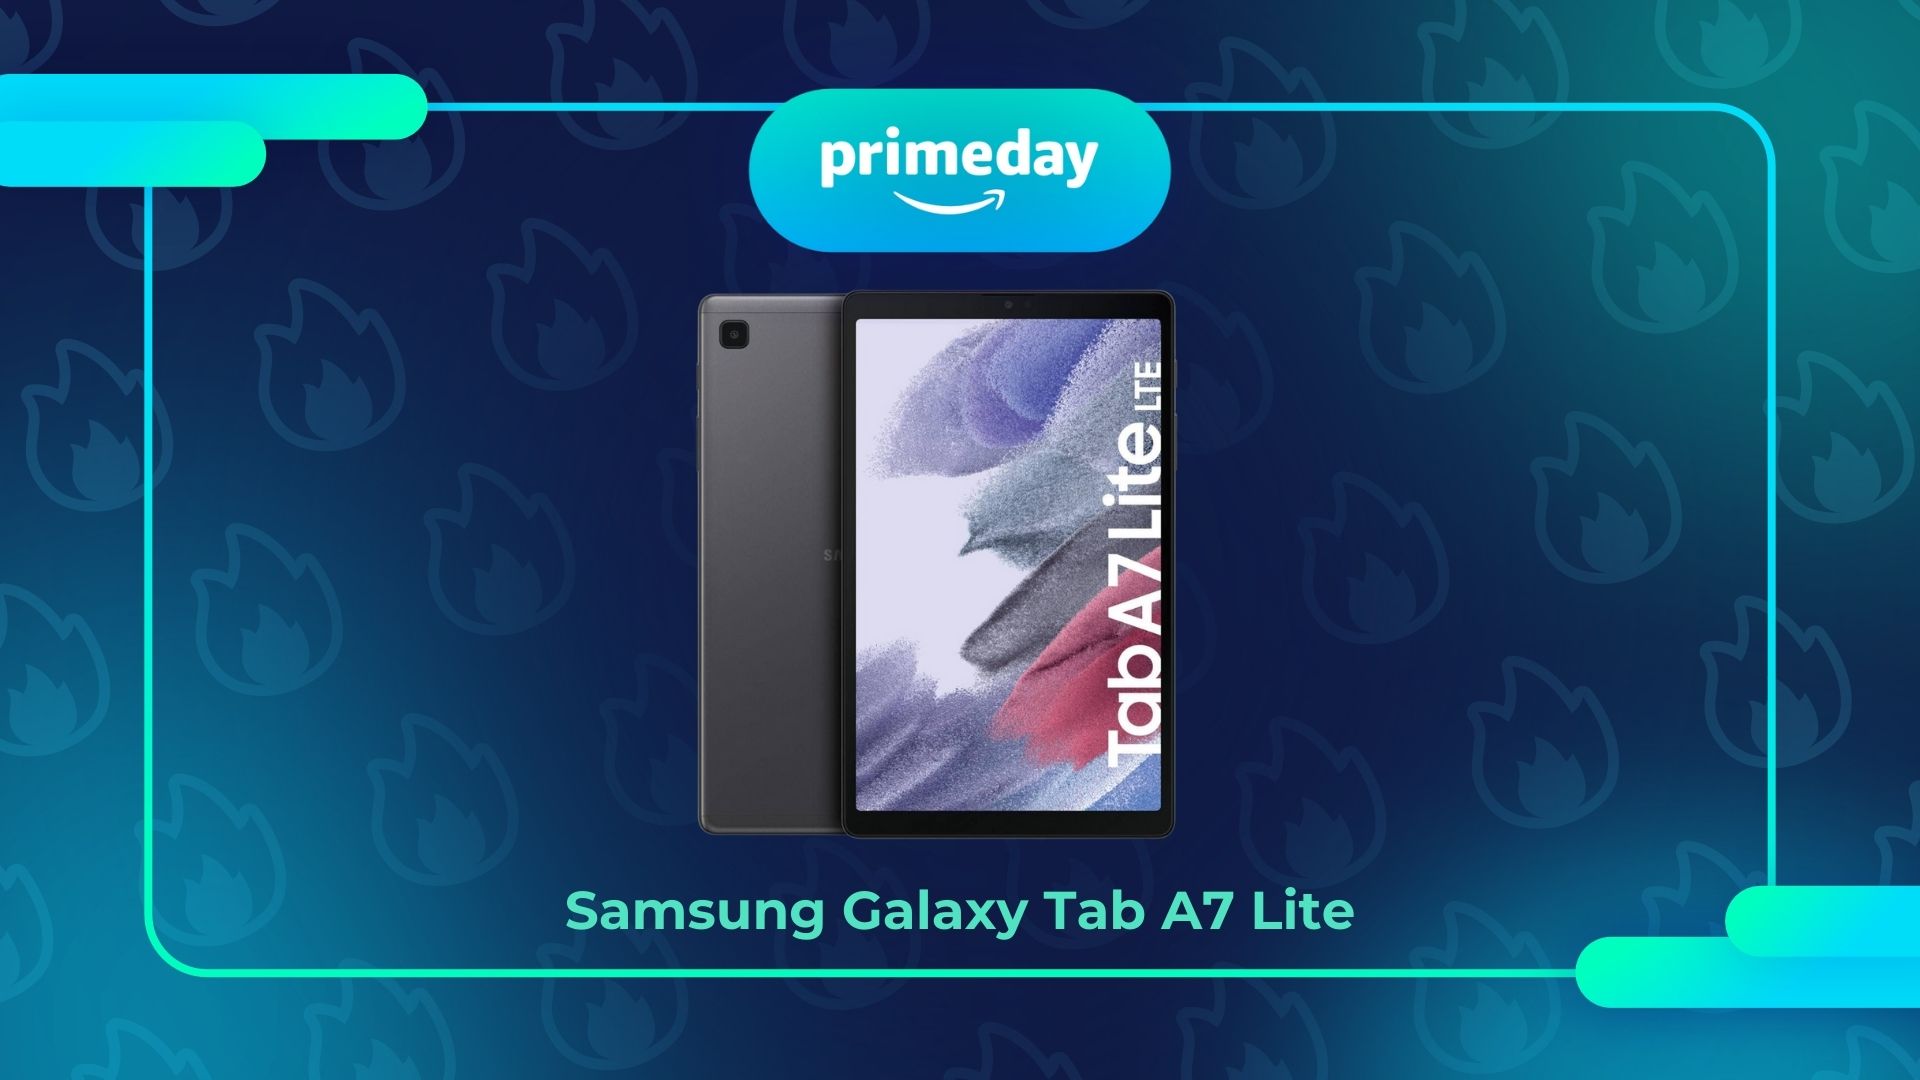 A Samsung tablet for only €129? Yes, it’s possible thanks to Prime Day ...